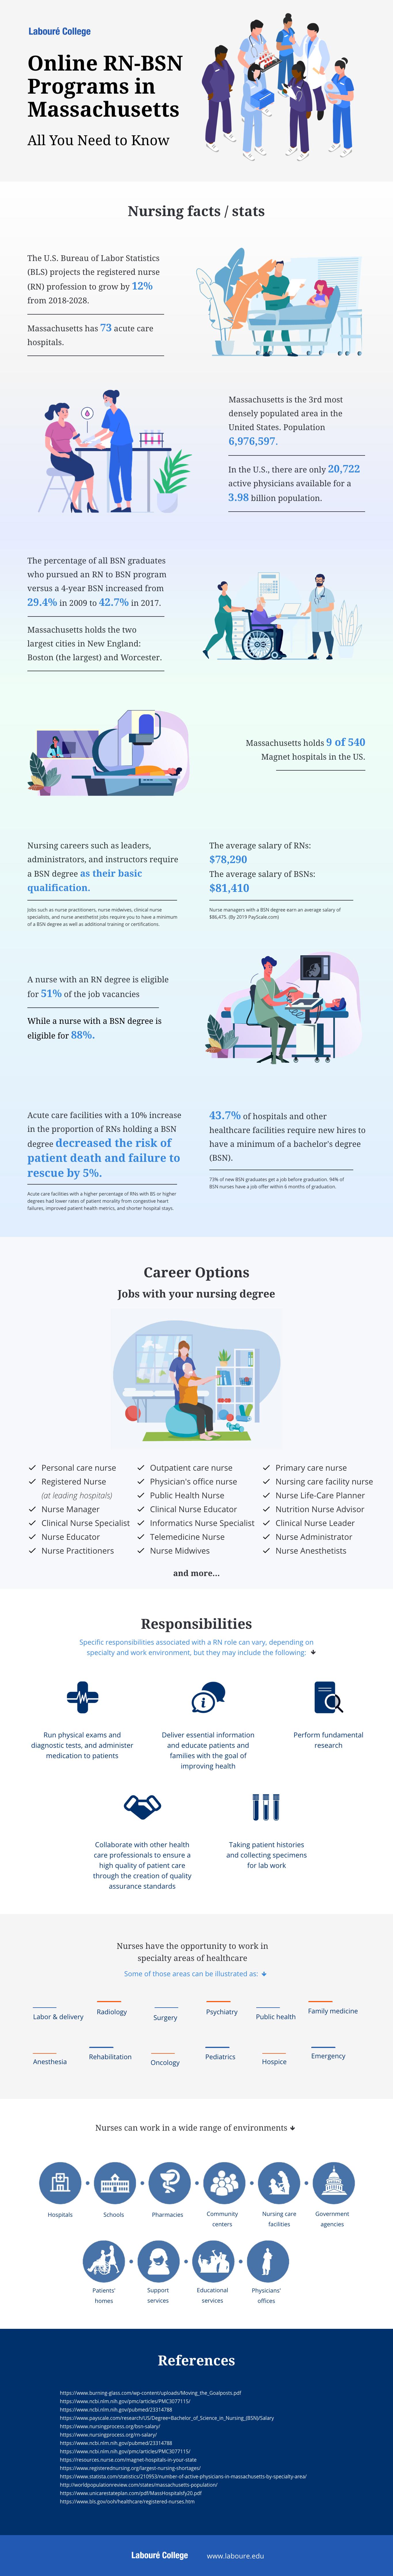 11 Incredible Nursing Statistics You Need to Know in 2021 (Infographic)